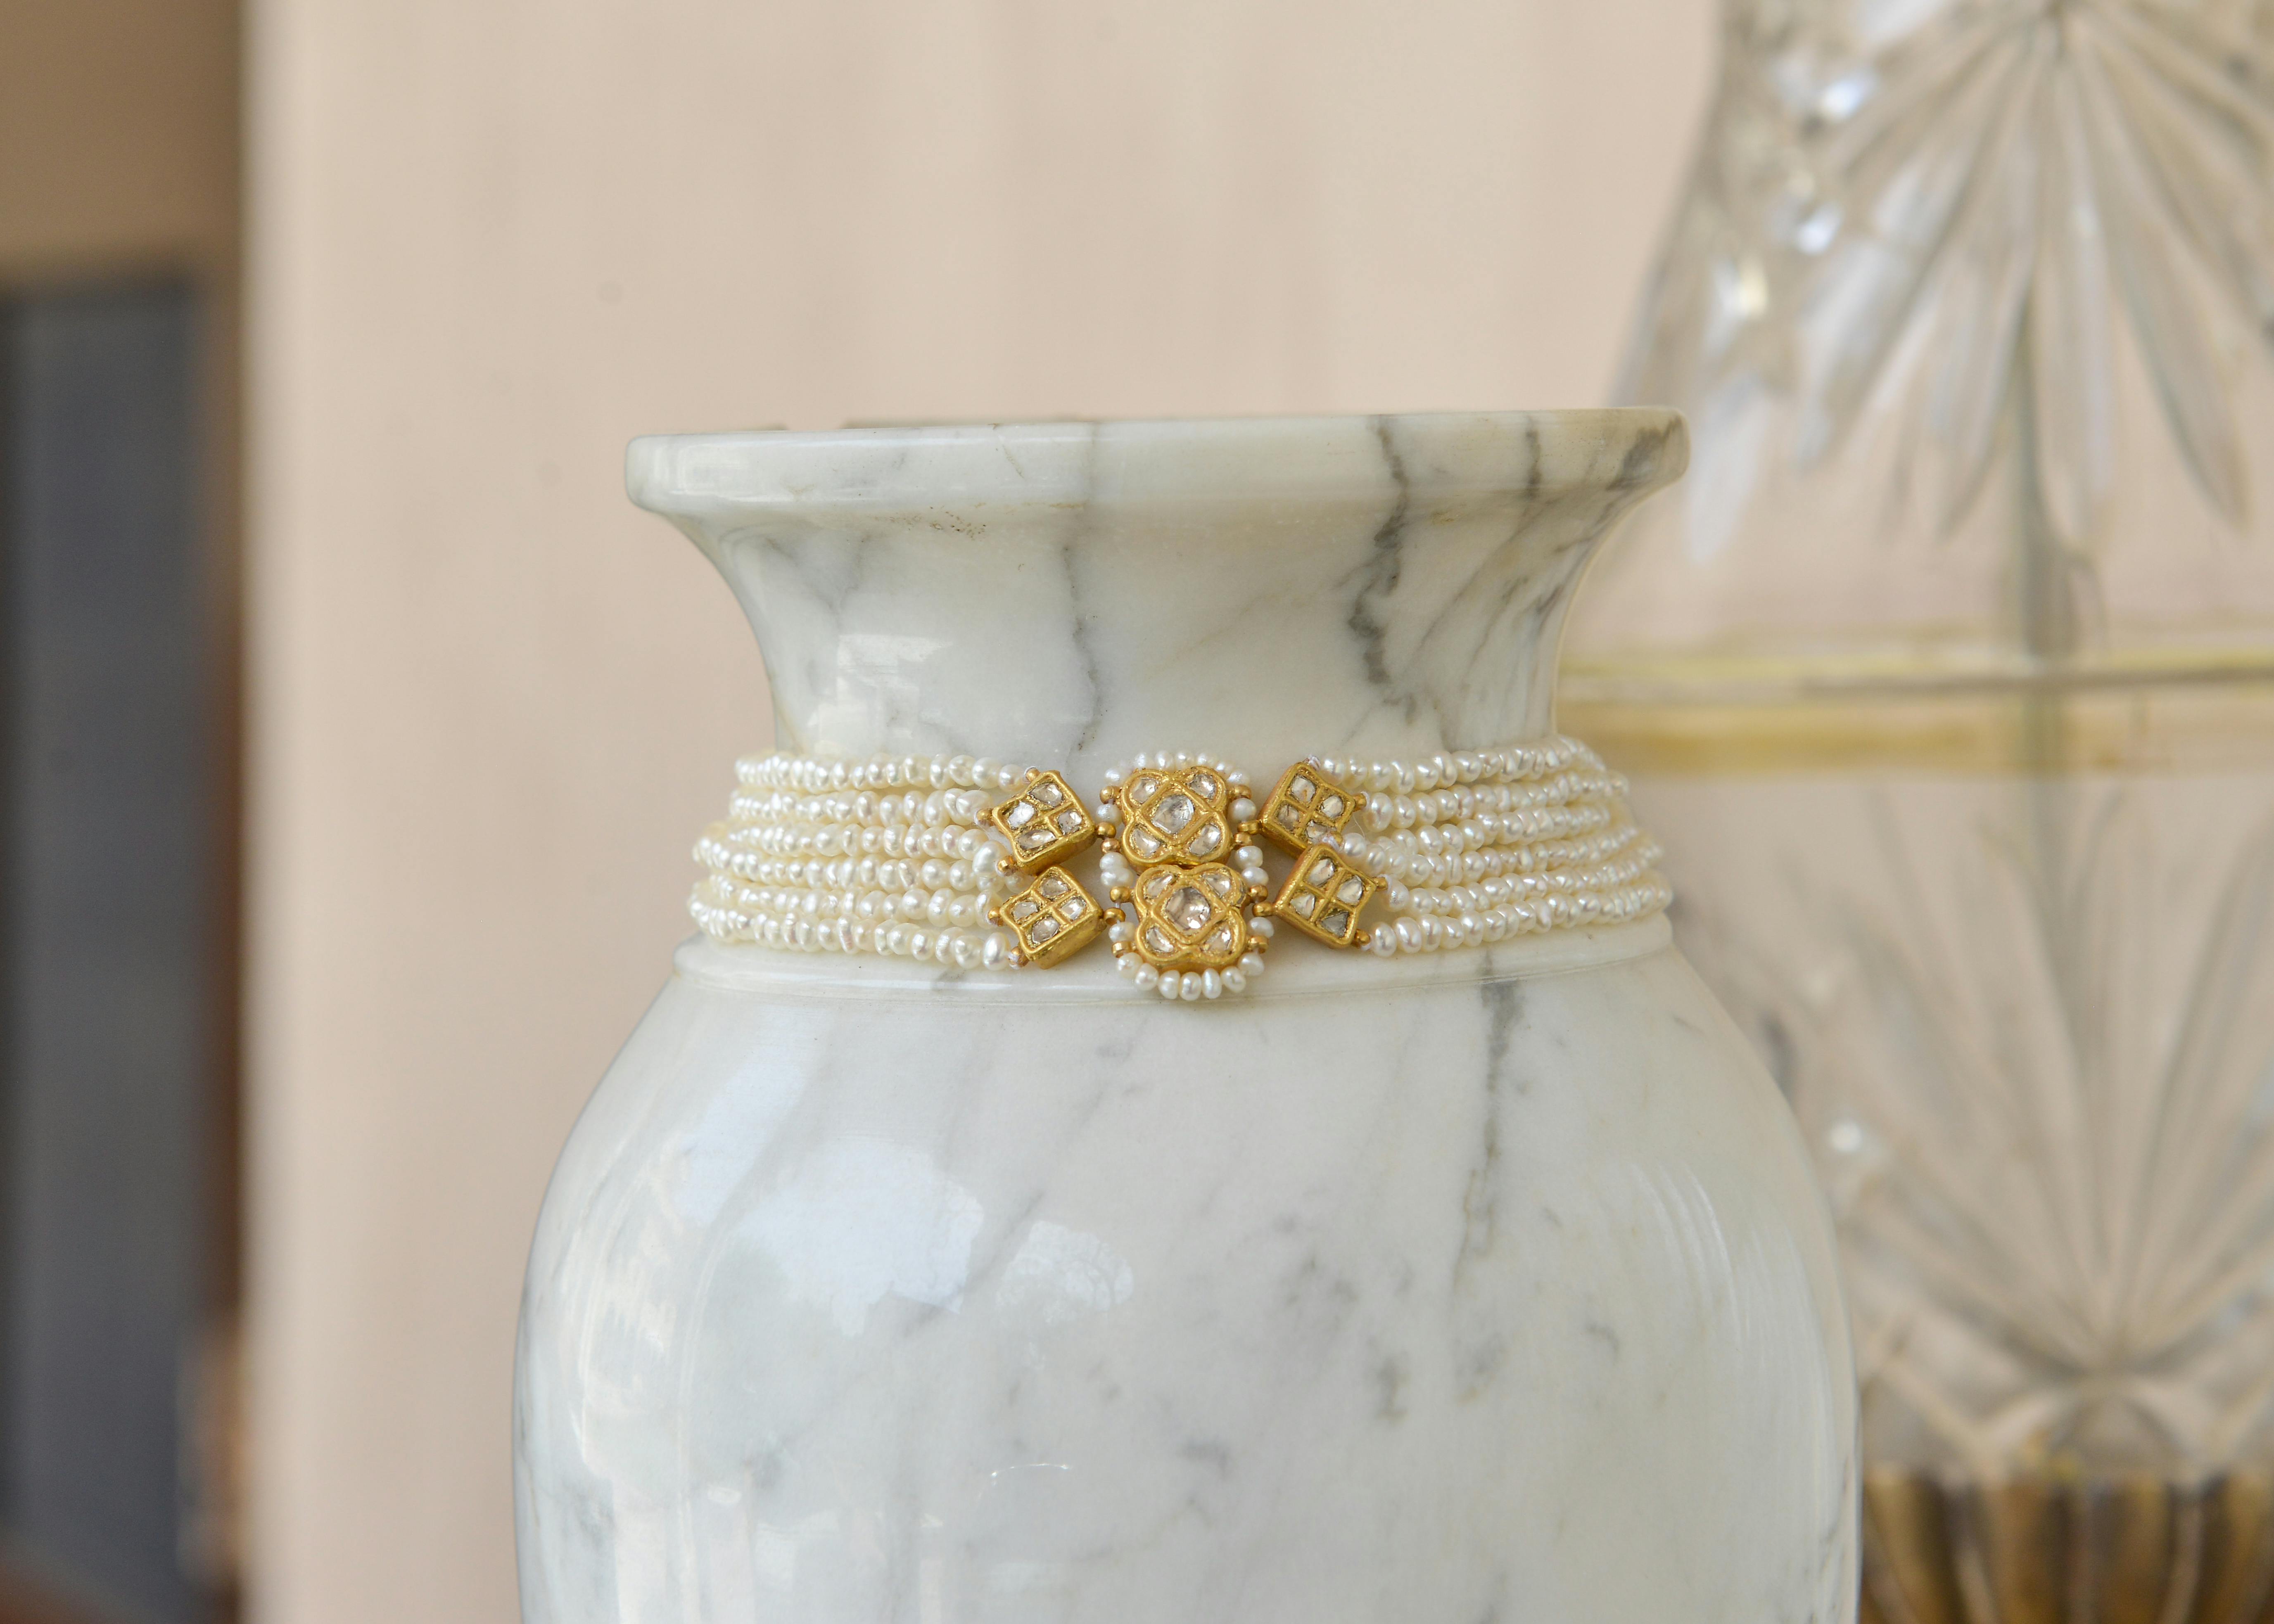 gold and white jewelry on white and gray ceramic vase